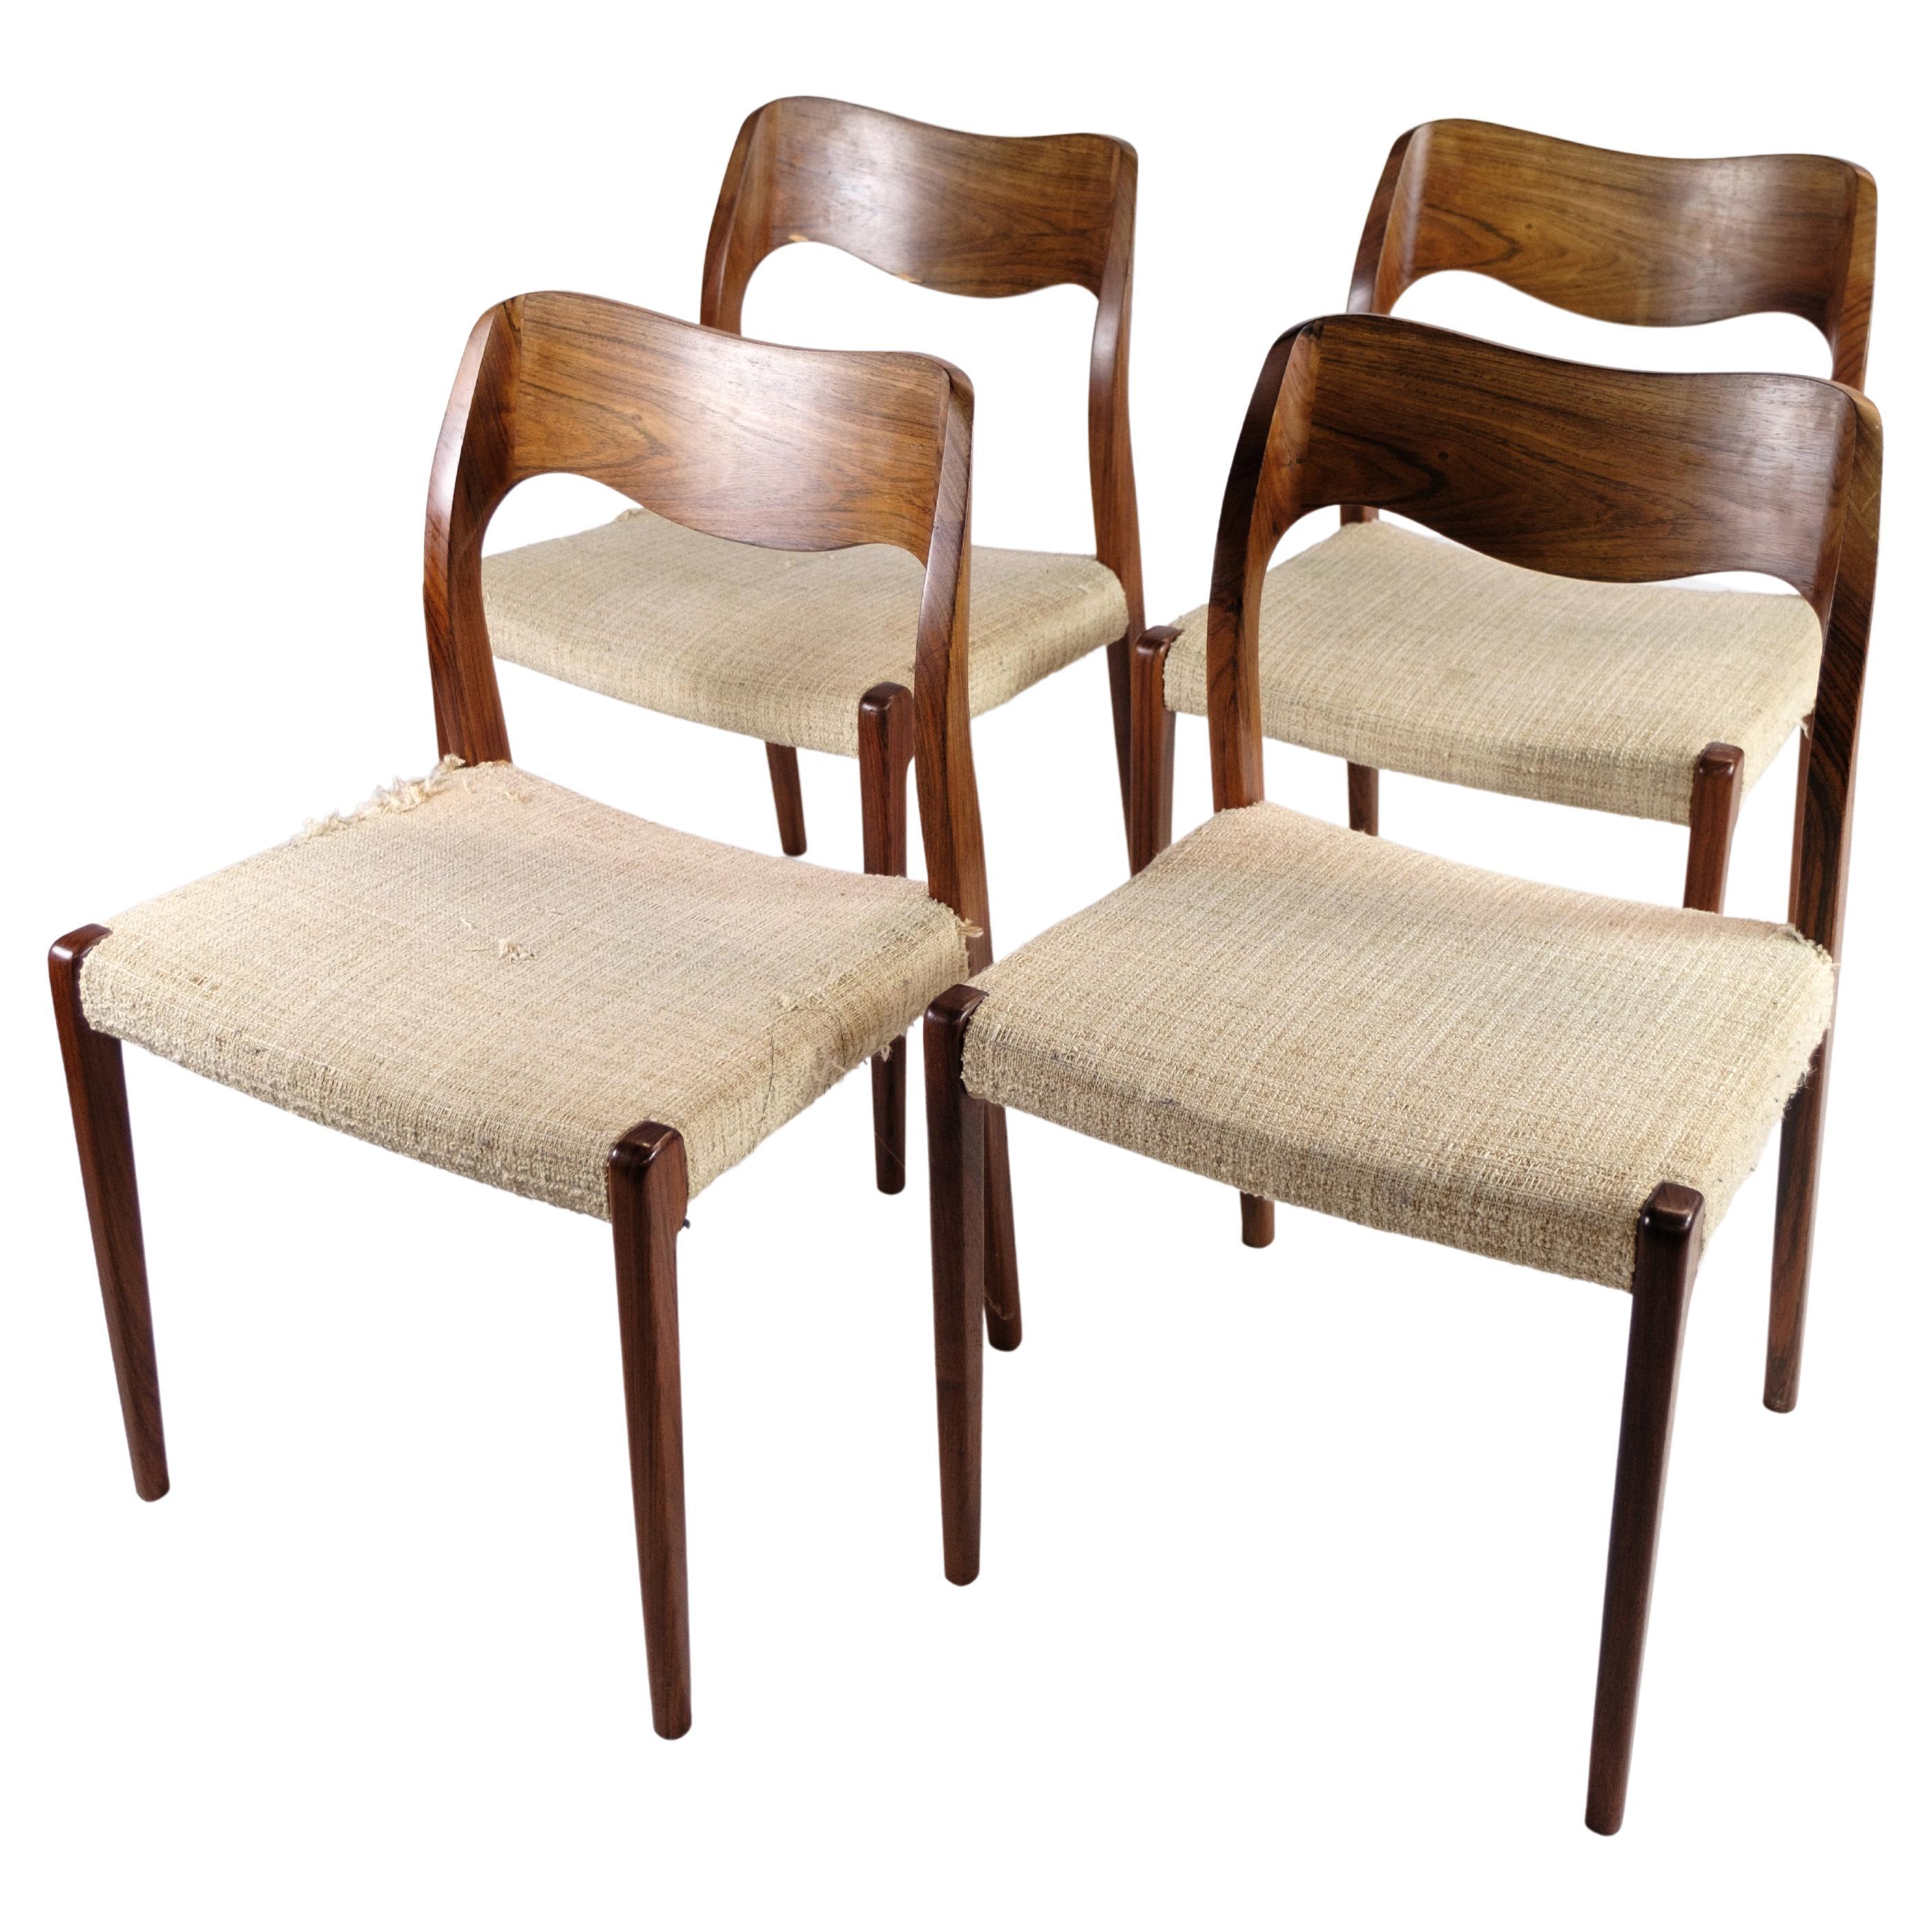 Set of 4 Dining Chairs in Rosewood, Model 71, N.O Møller, Designed in 1951